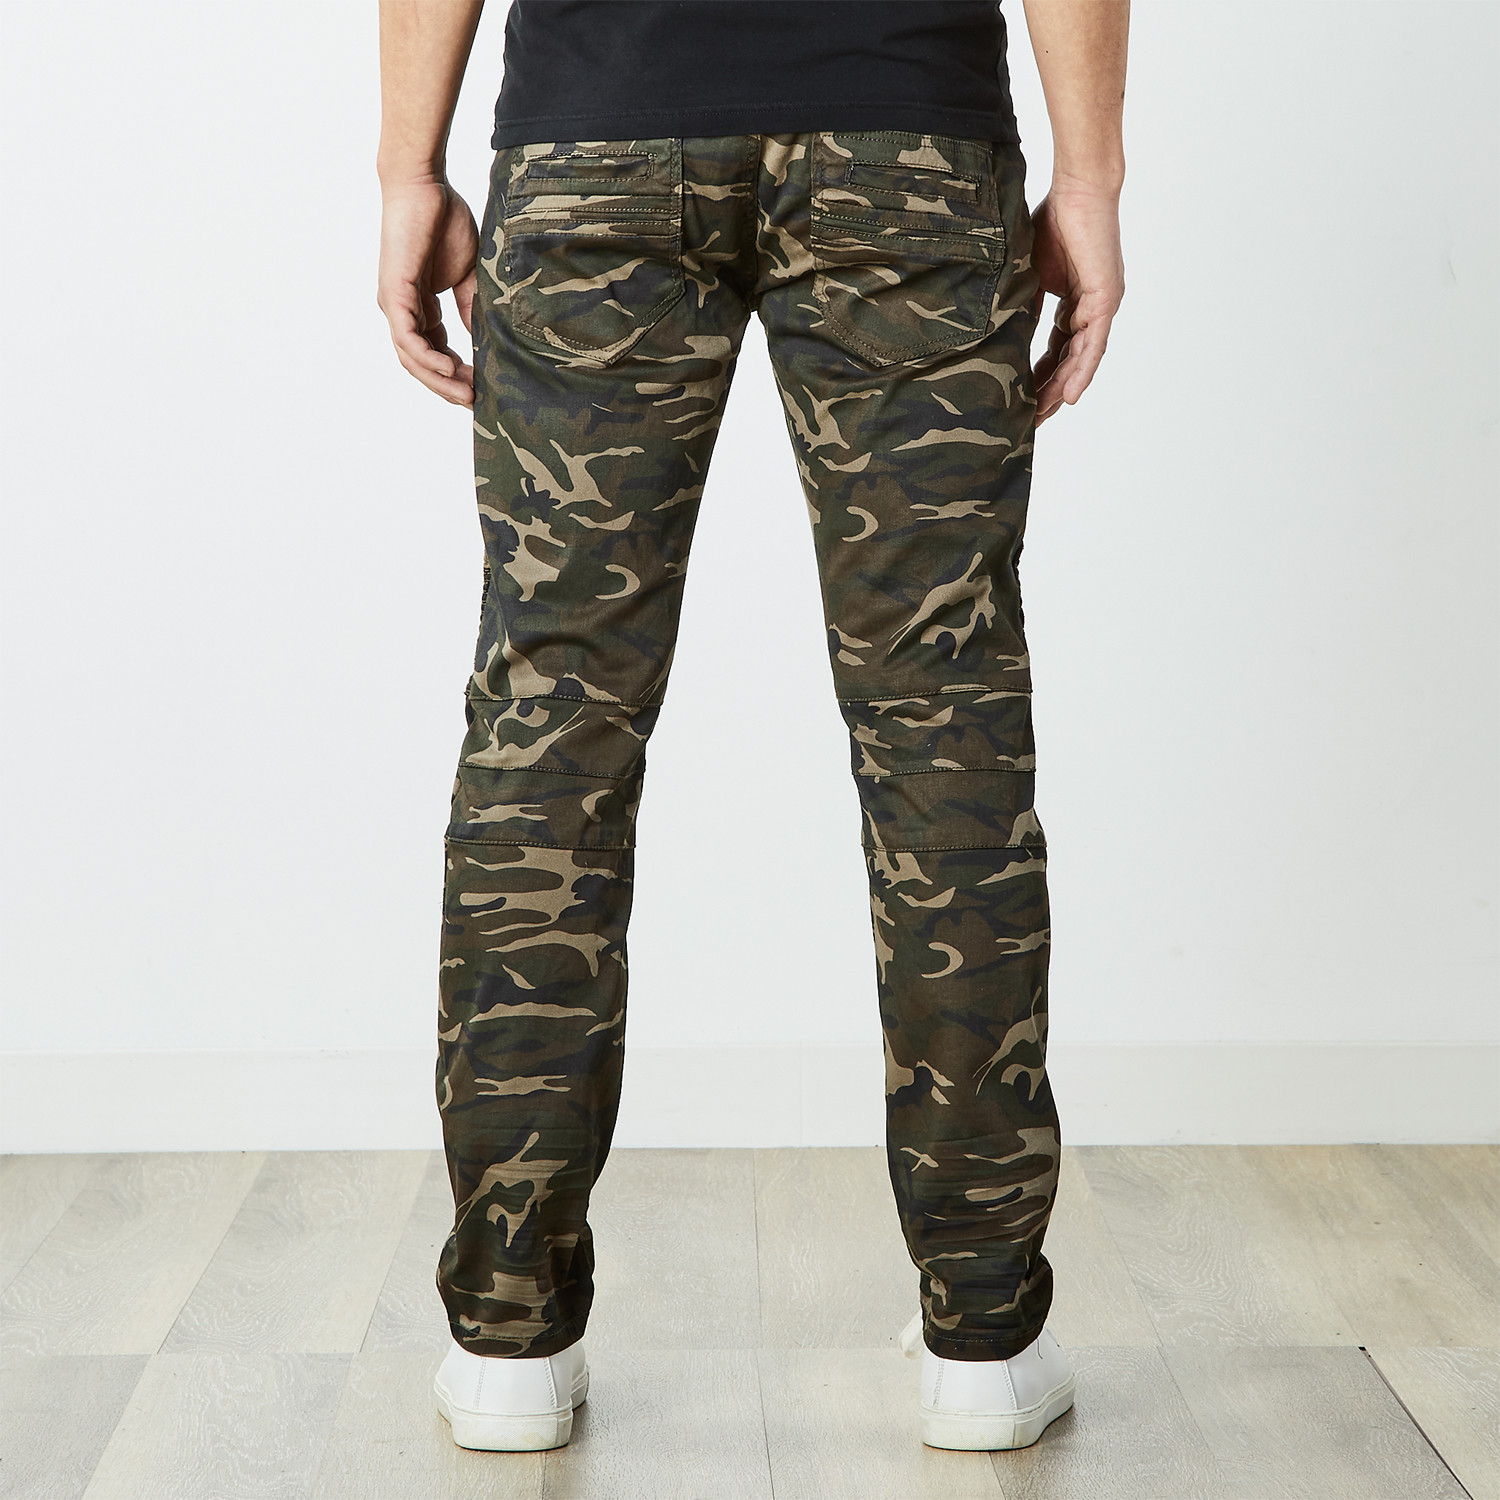 Slim Fit Moto Jeans // Olive Camo (30WX30L) - Xray Jeans - Touch of Modern